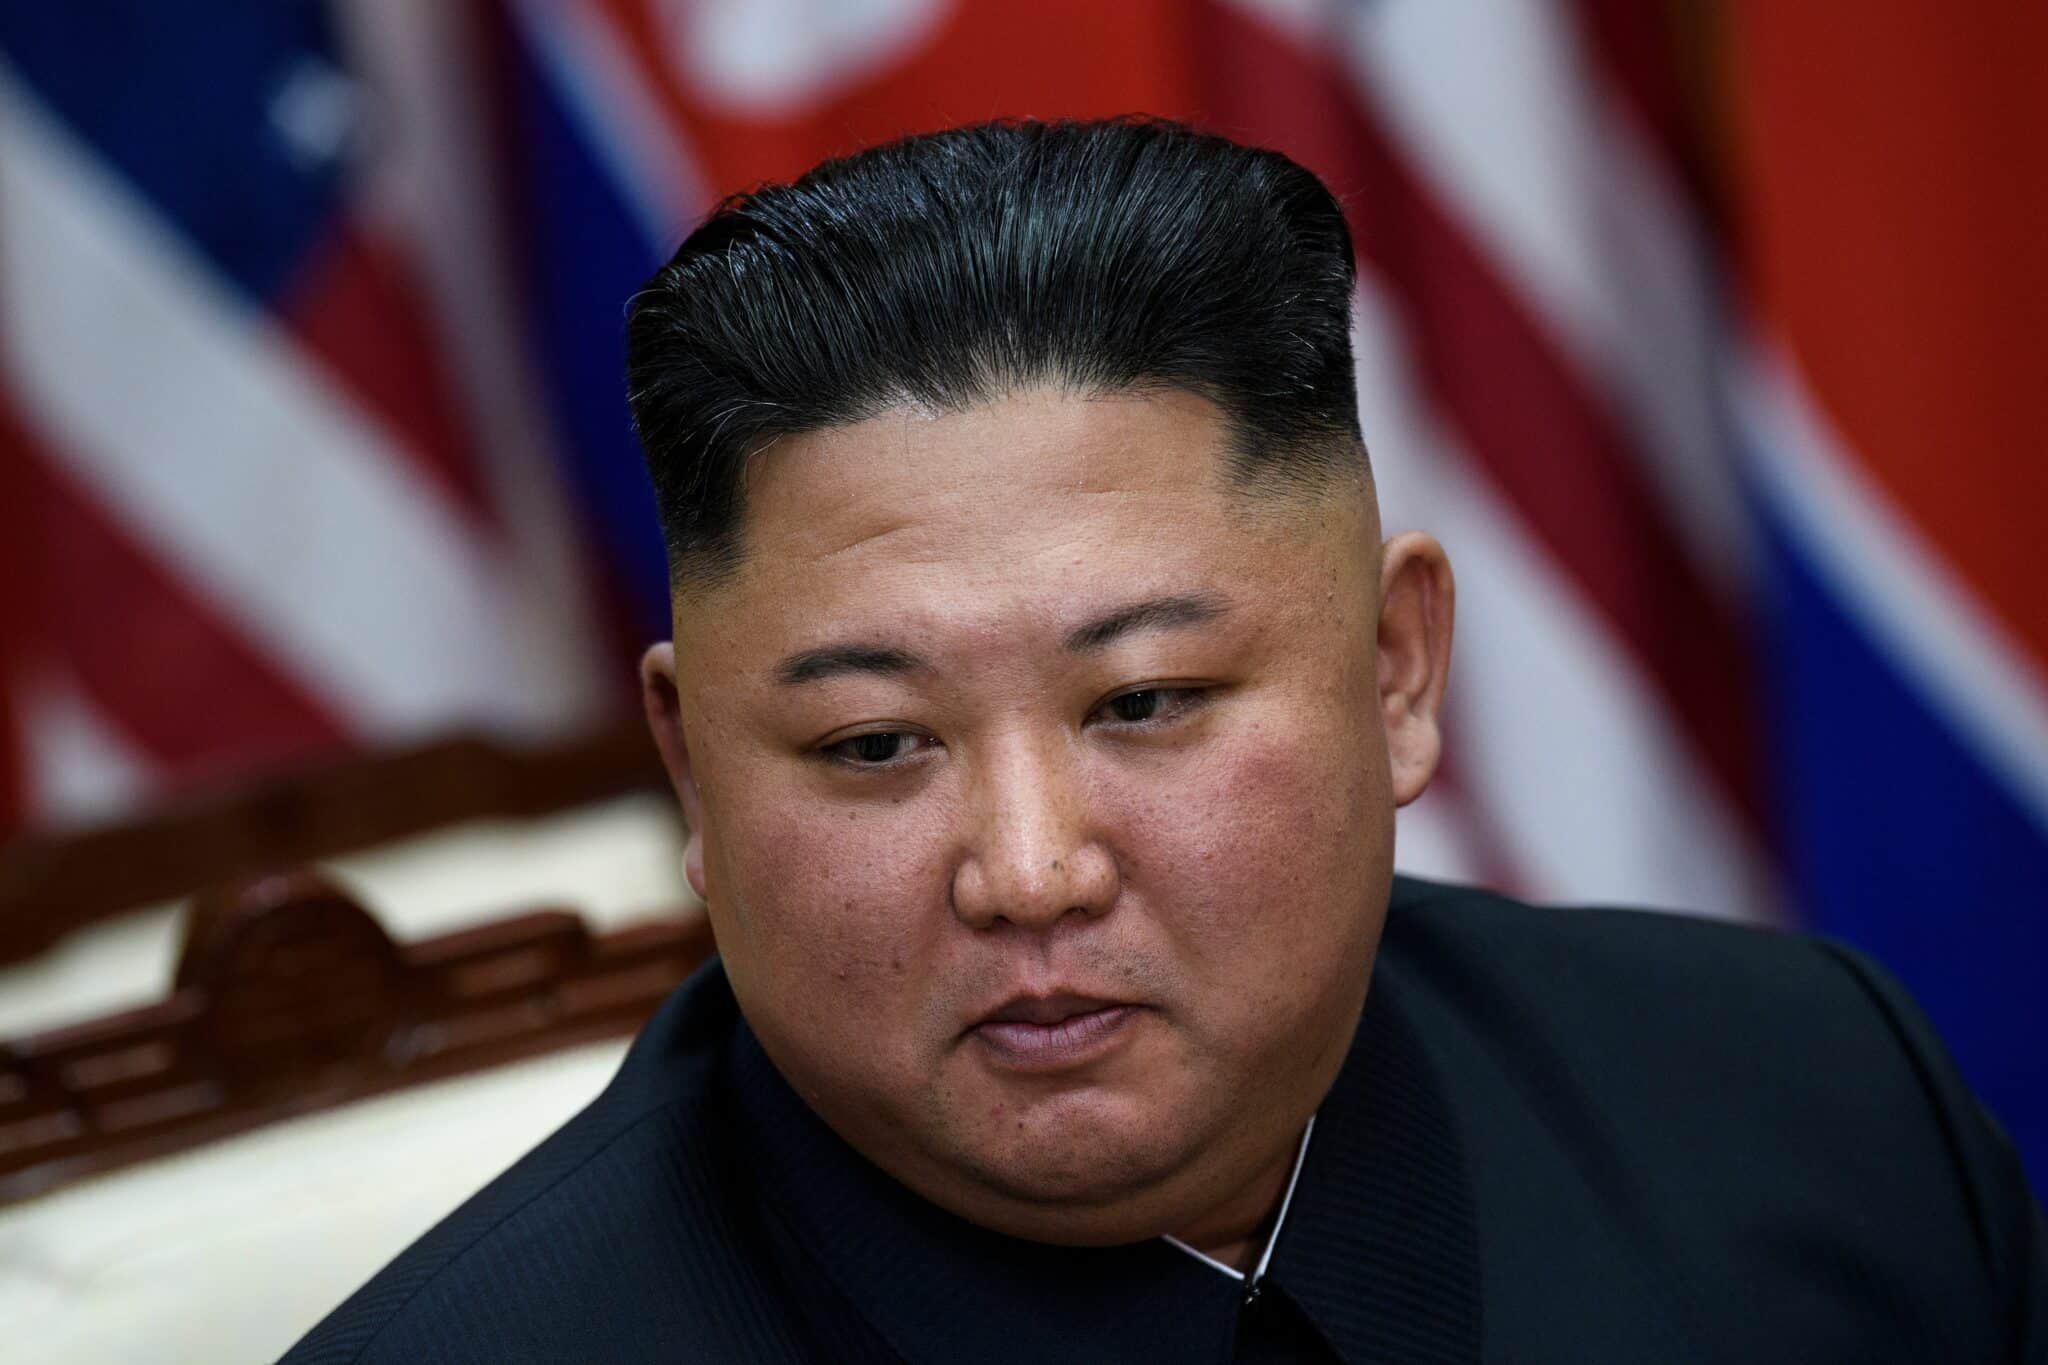 TOPSHOT - North Korea's leader Kim Jong Un before a meeting with  US President Donald Trump on the south side of the Military Demarcation Line that divides North and South Korea, in the Joint Security Area (JSA) of Panmunjom in the Demilitarized zone (DMZ) on June 30, 2019. (Photo by Brendan Smialowski / AFP)        (Photo credit should read BRENDAN SMIALOWSKI/AFP via Getty Images)